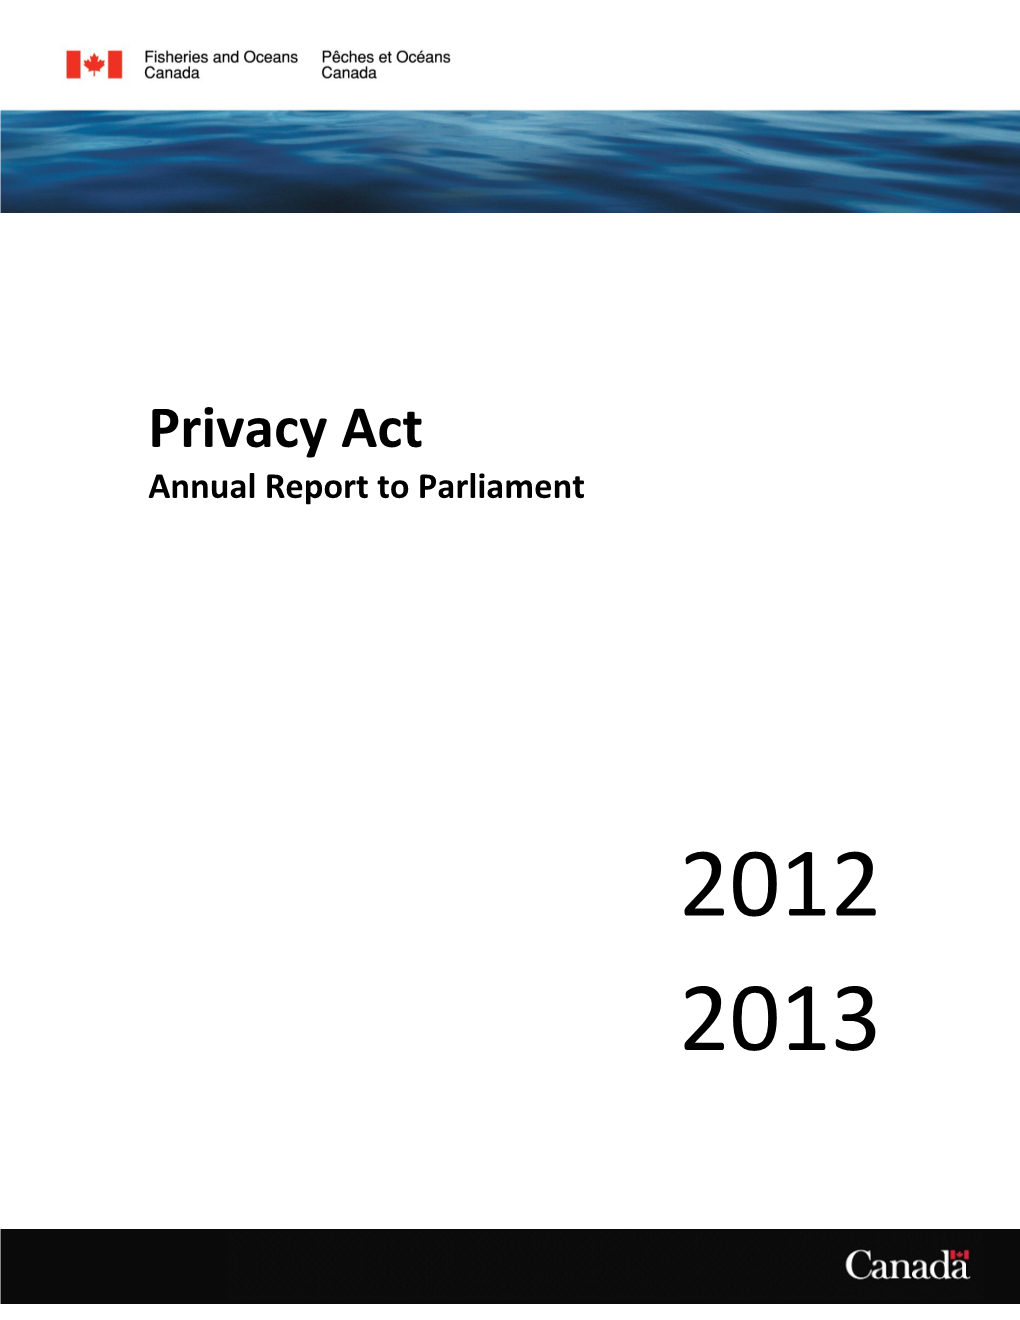 Annual Report to Parliament